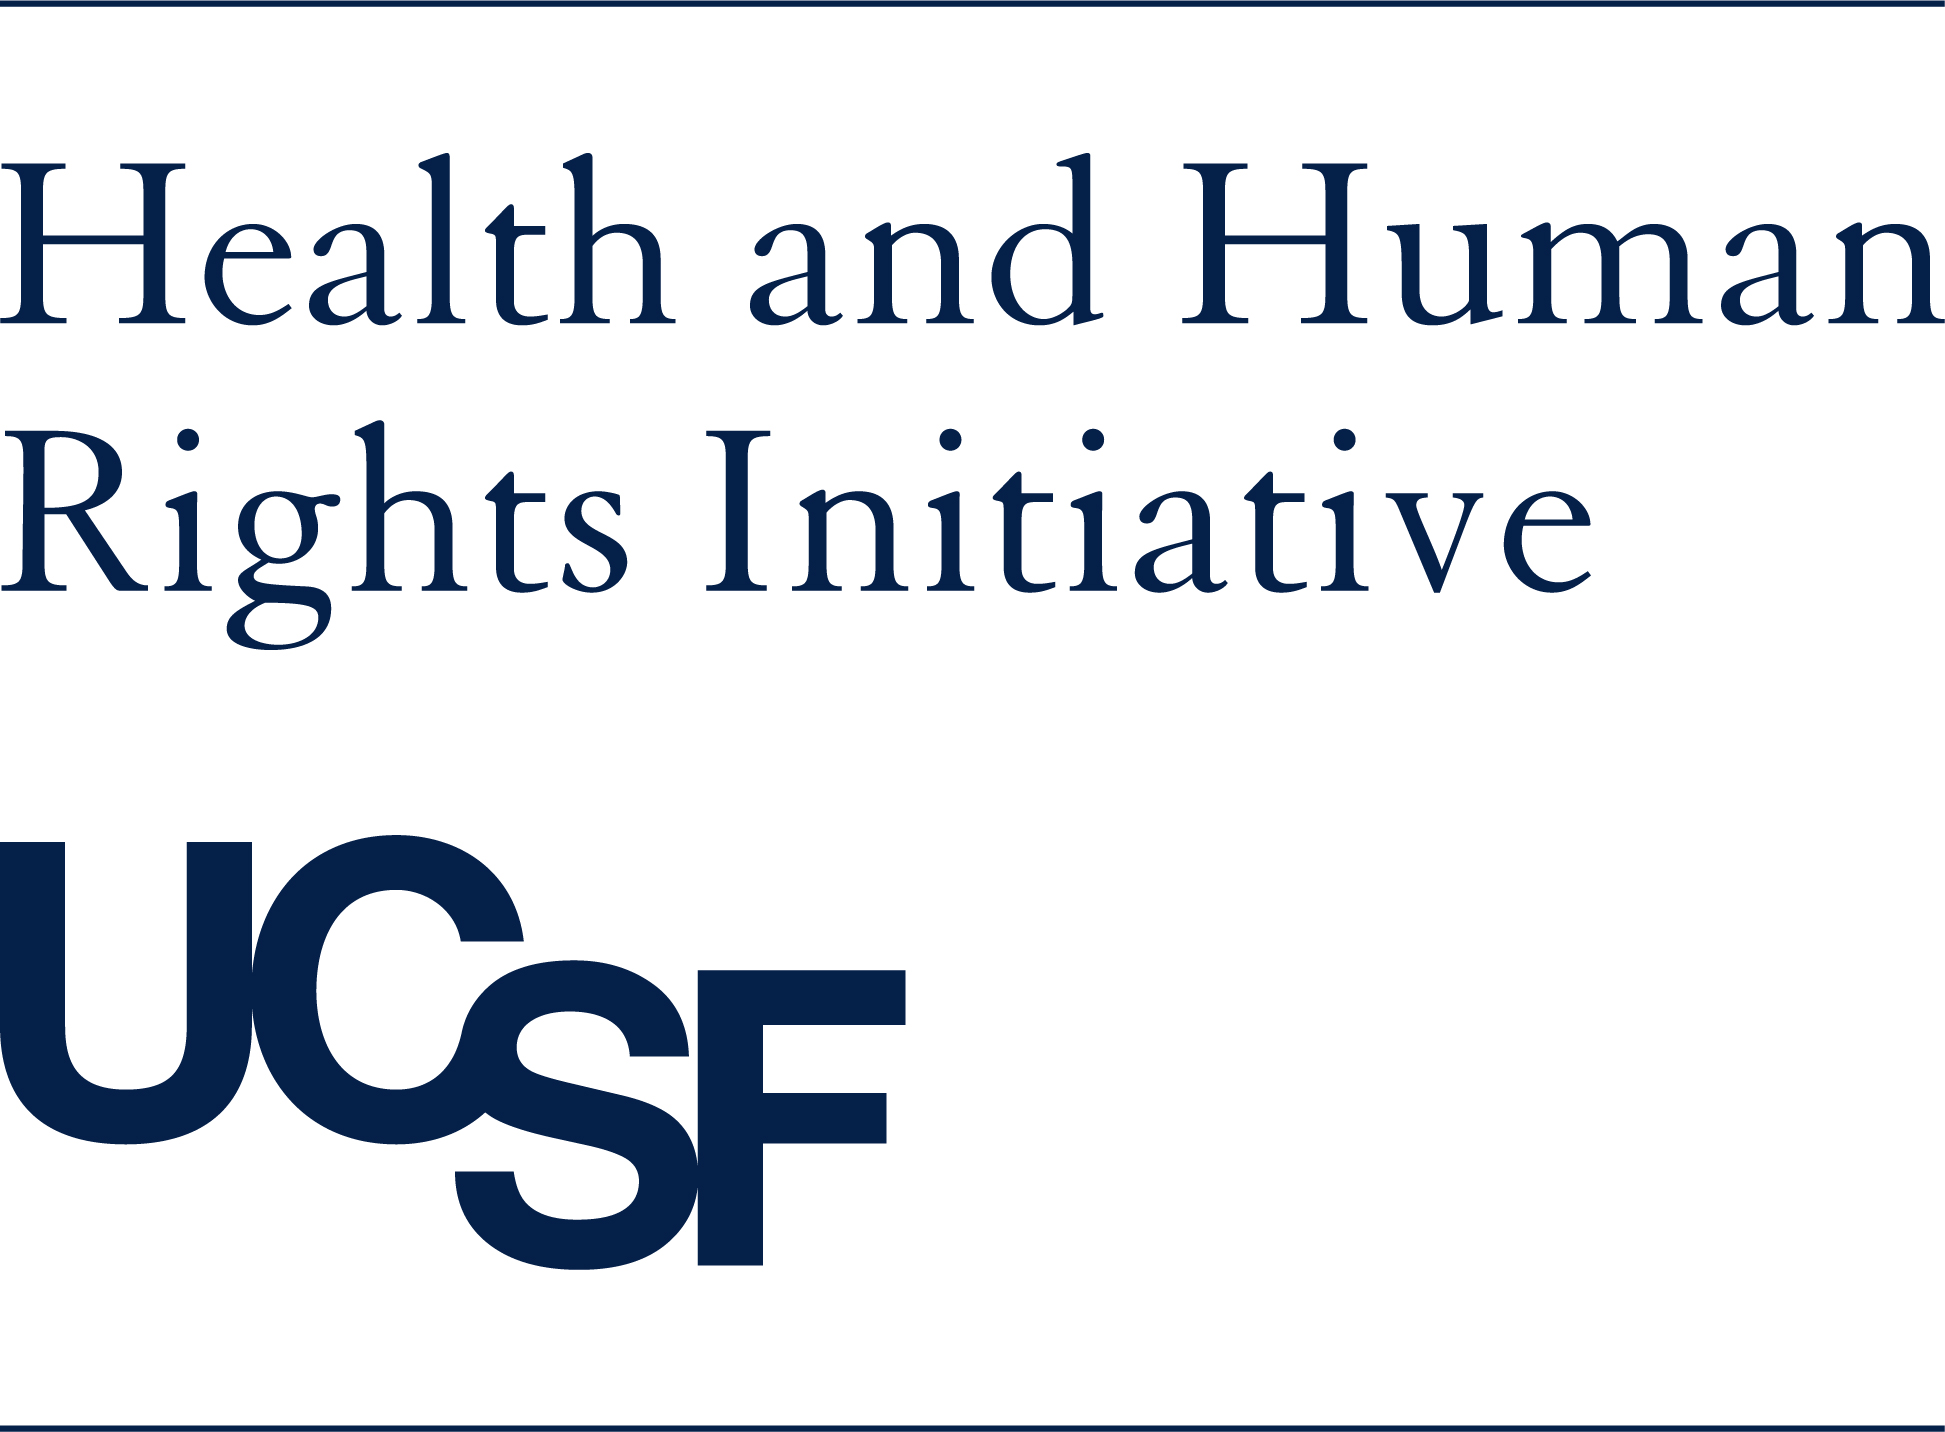 Health and Human Rights Initiative